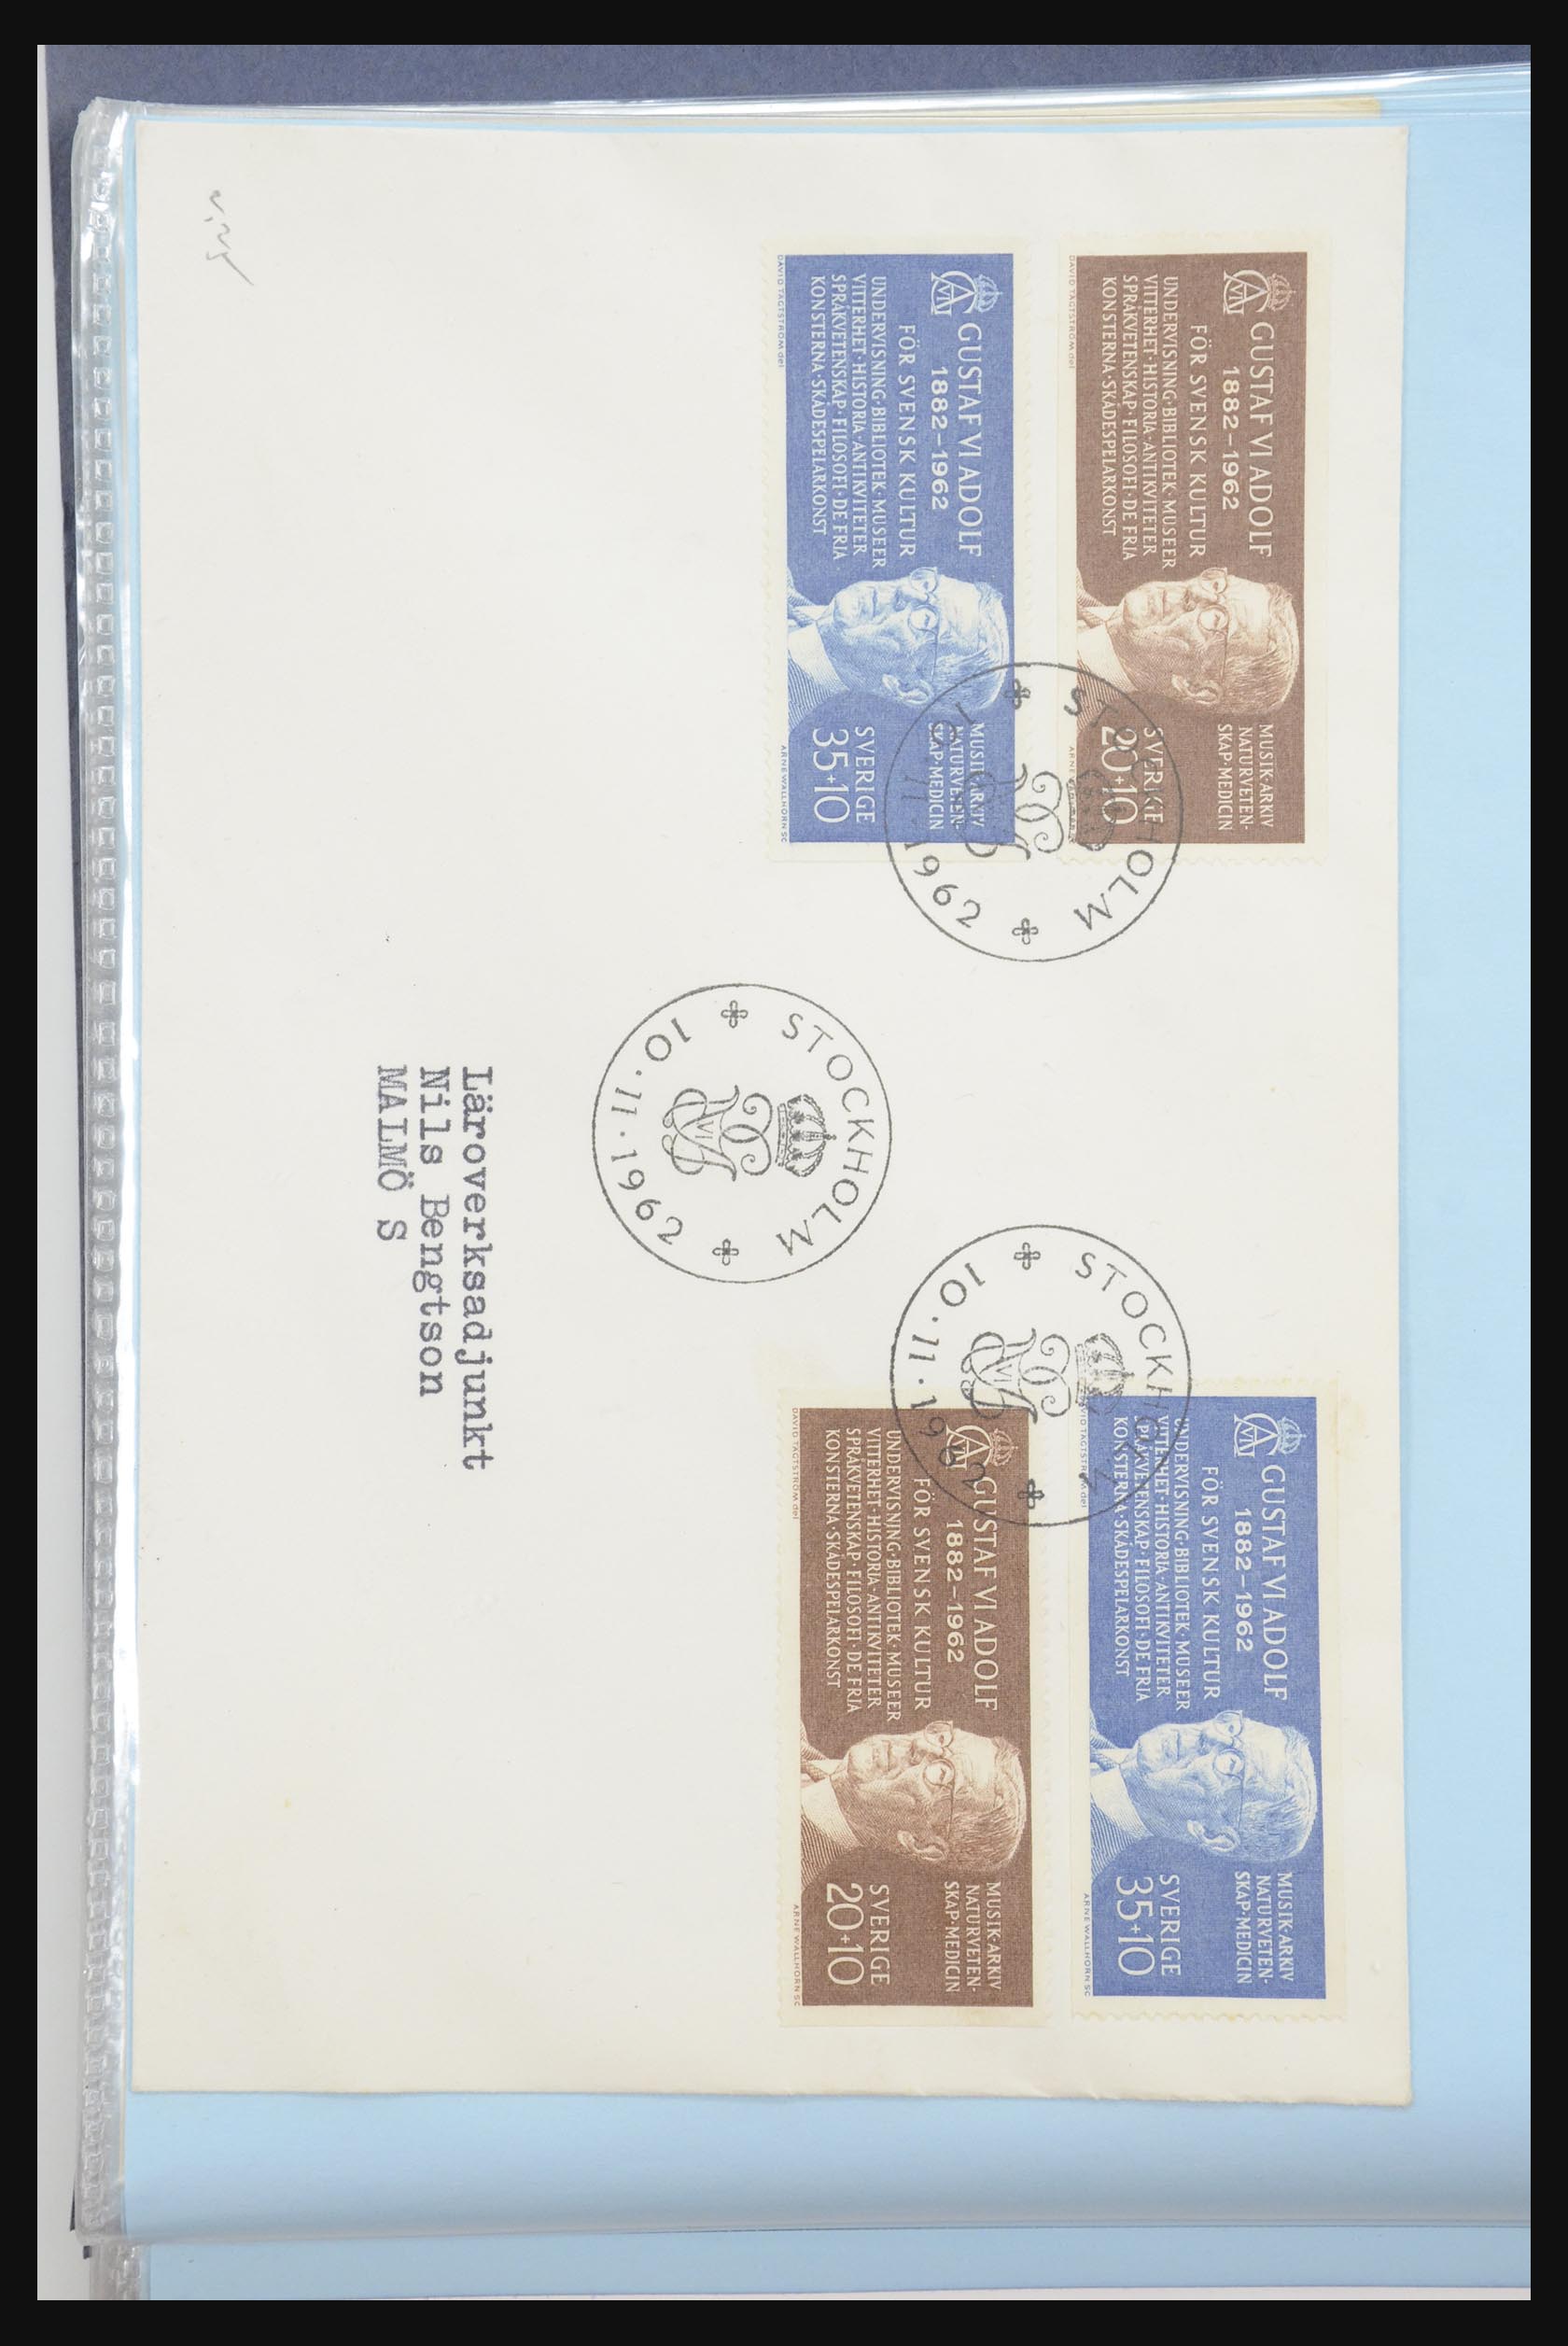 31915 110 - 31915 Western Europe souvenir sheets and stamp booklets on FDC.